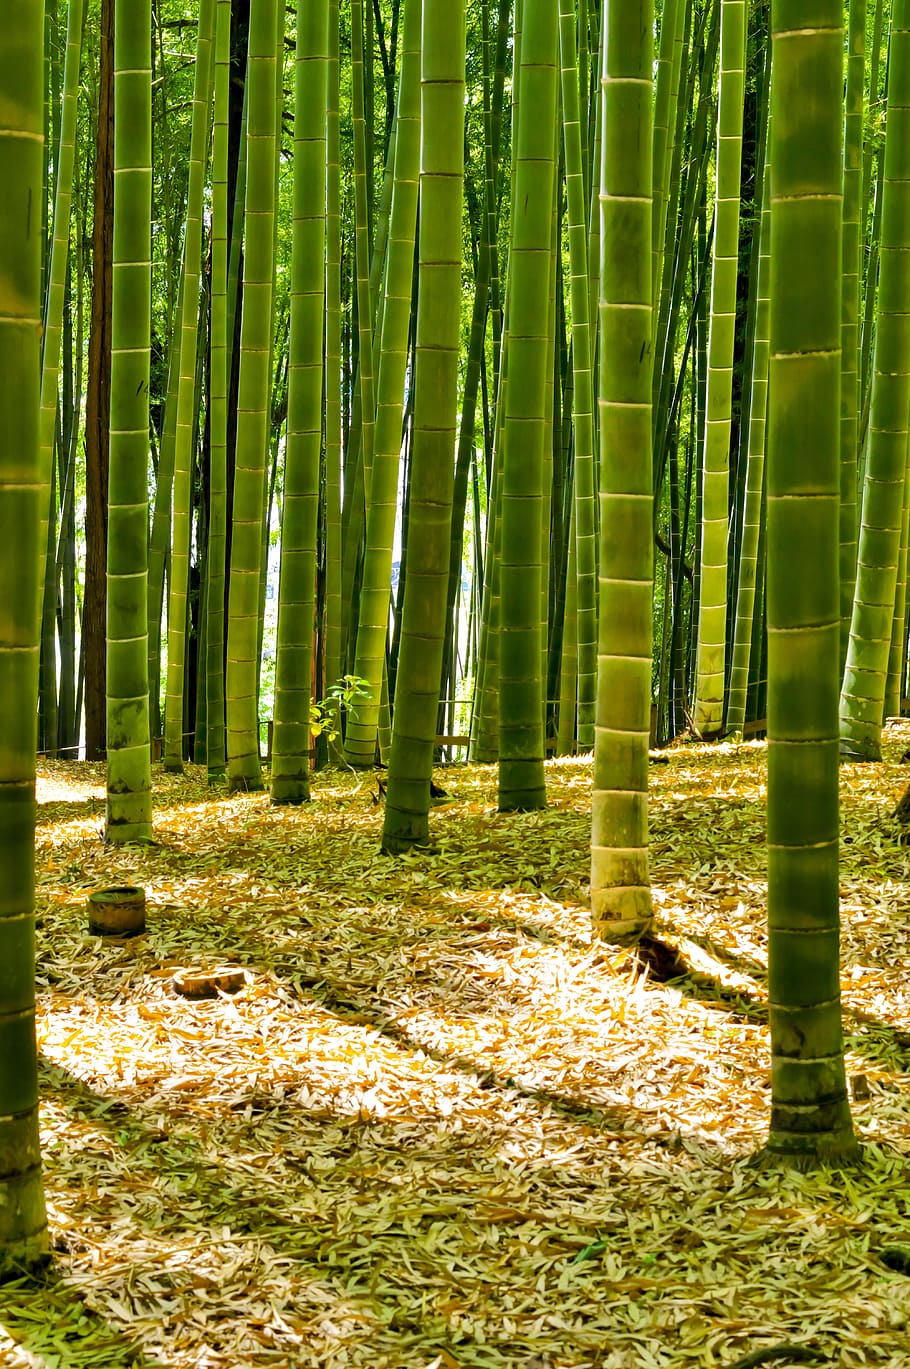 green bamboo trees, Japan, Forest, bamboo forest, natural, landscape, HD wallpaper